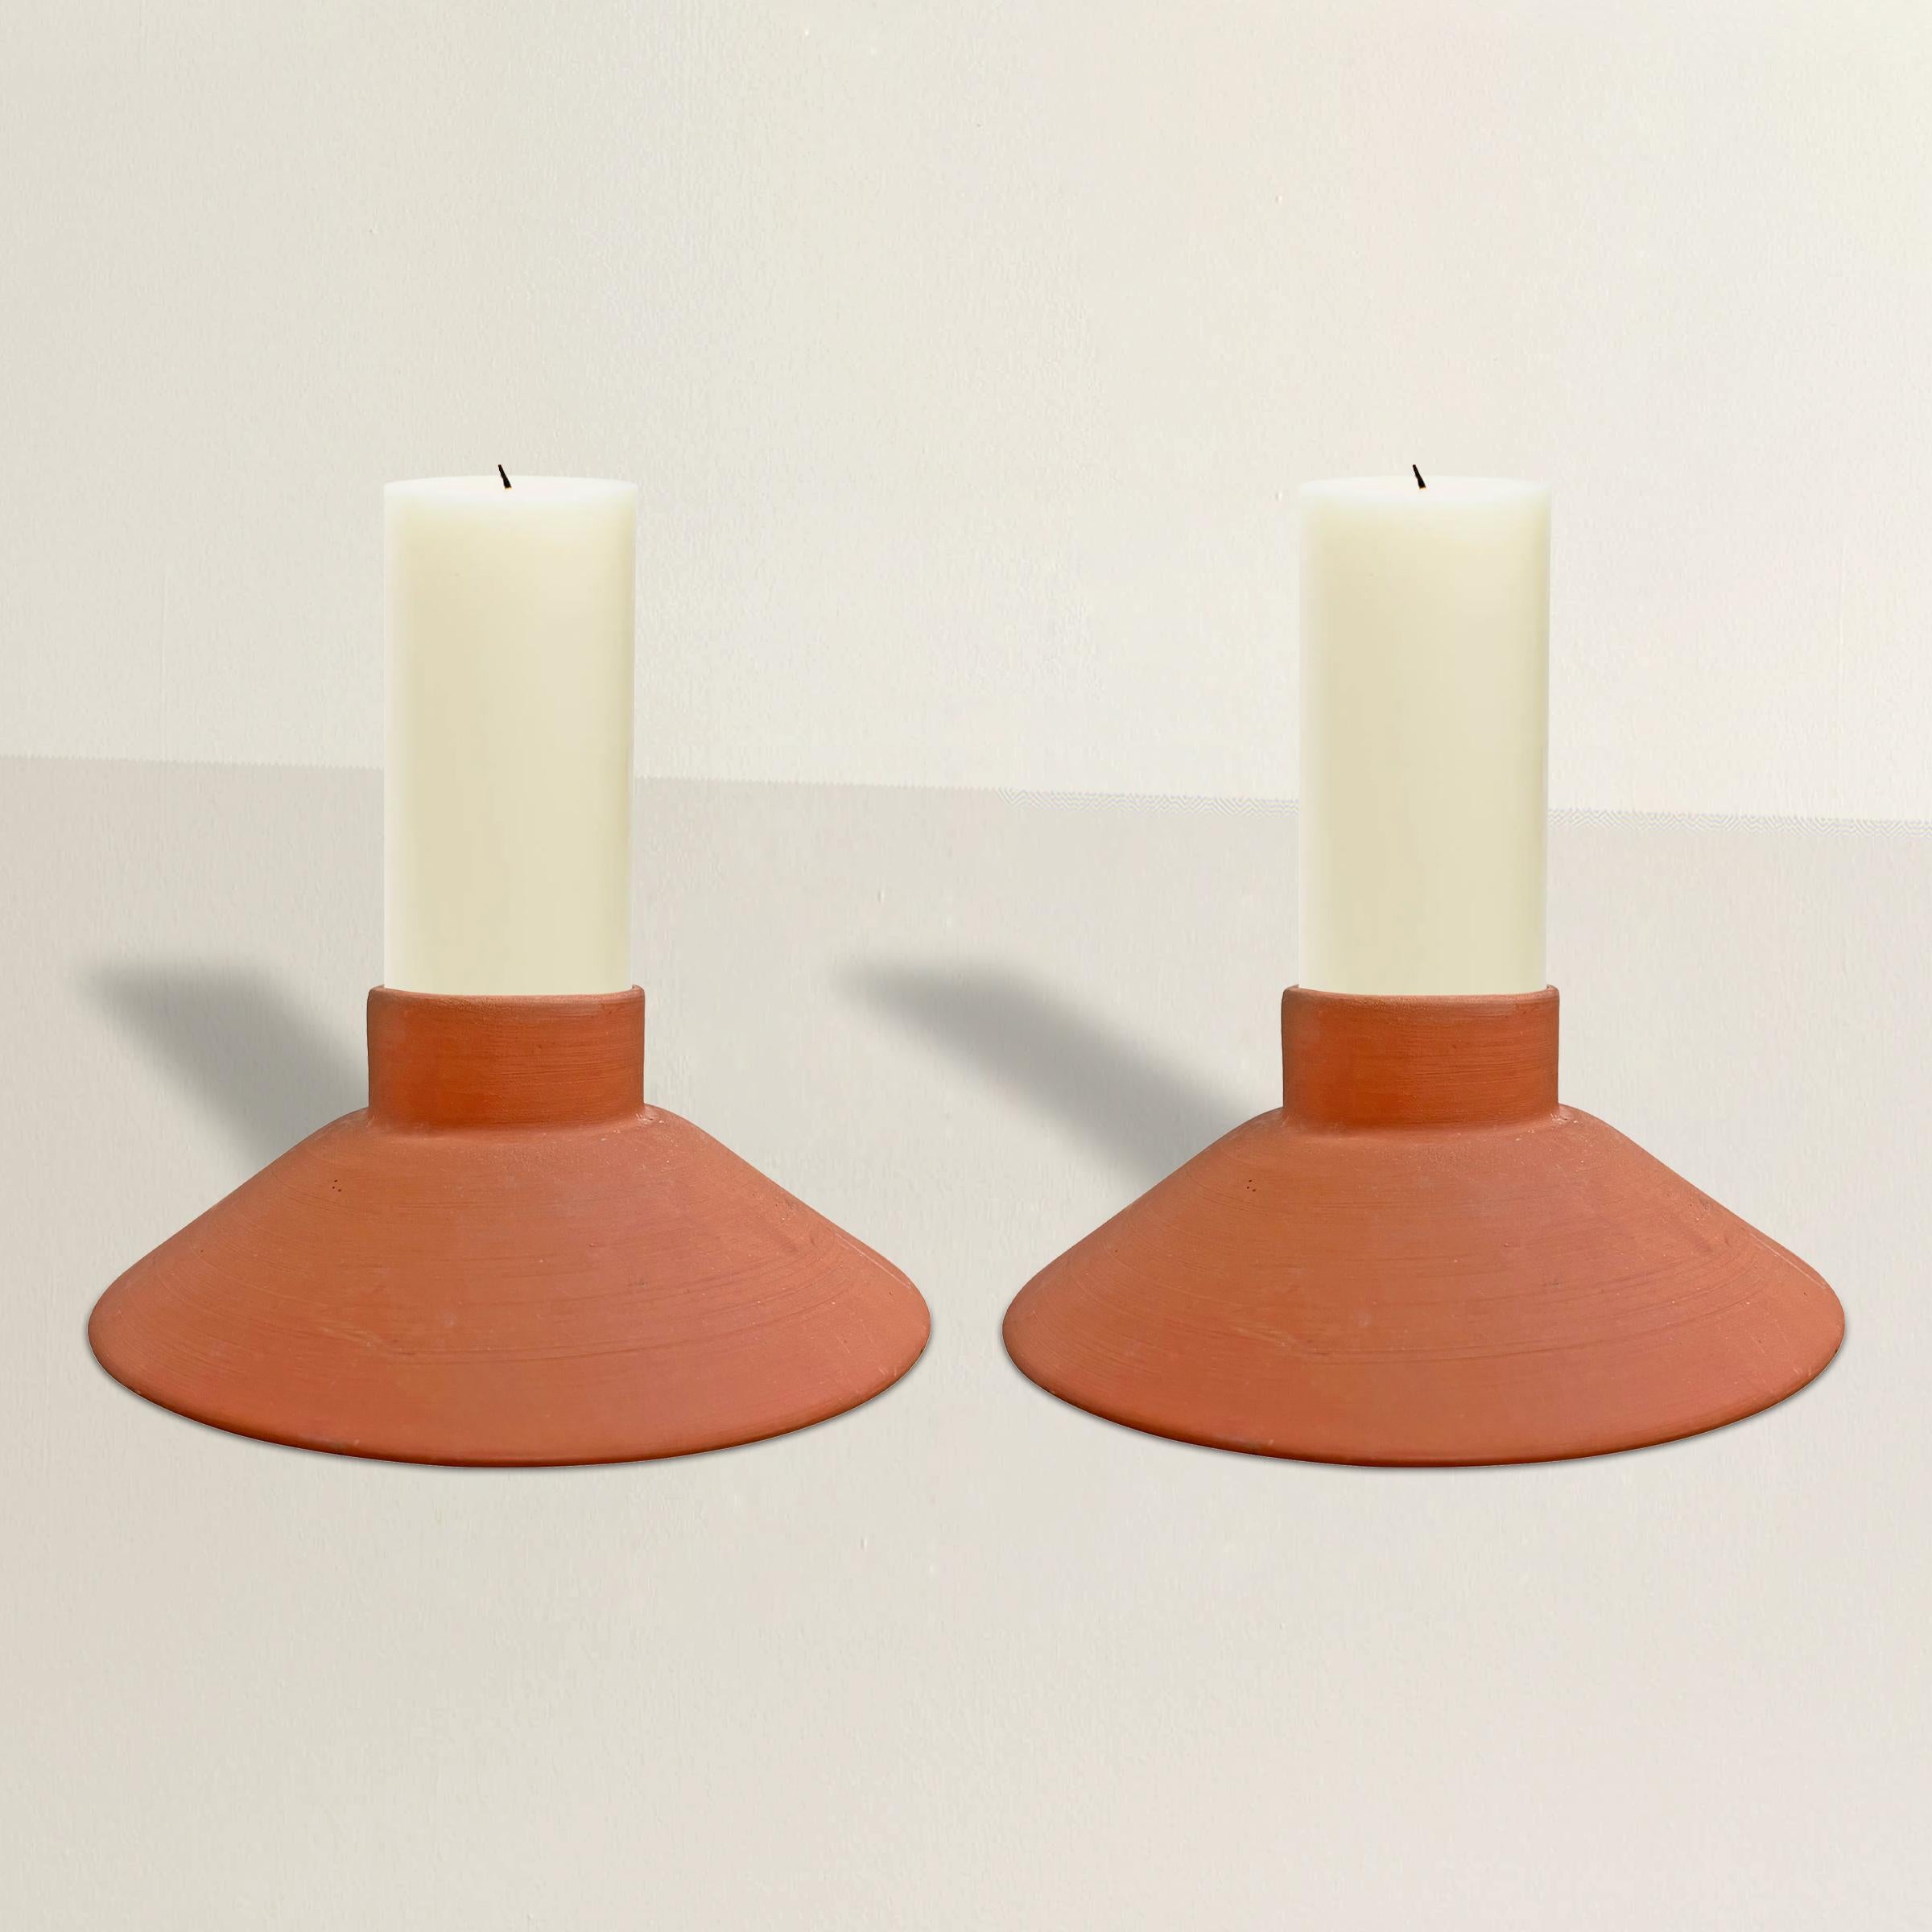 A chic pair of vintage terracotta pillar candle holders with a simple tapered shape that blends seamlessly into any style interior. Use on your dining table, coffee table, entry console, or cover with glass hurricanes and use them outside on your